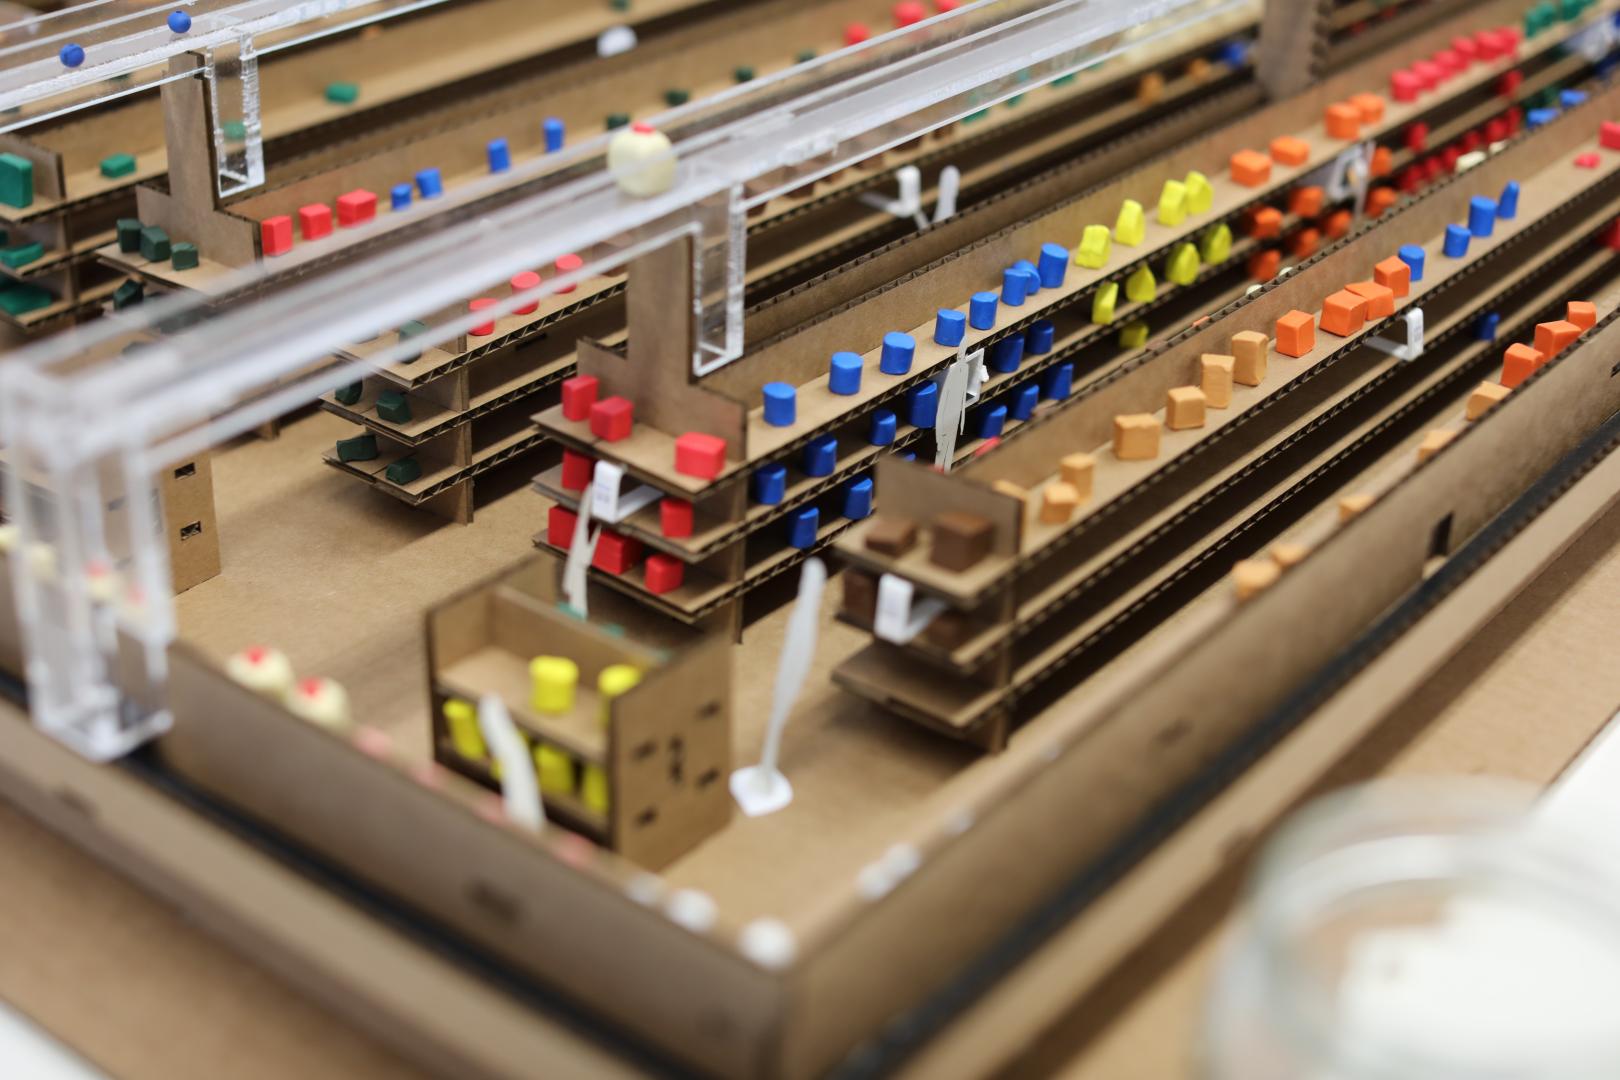 Model of a miniature grocery store